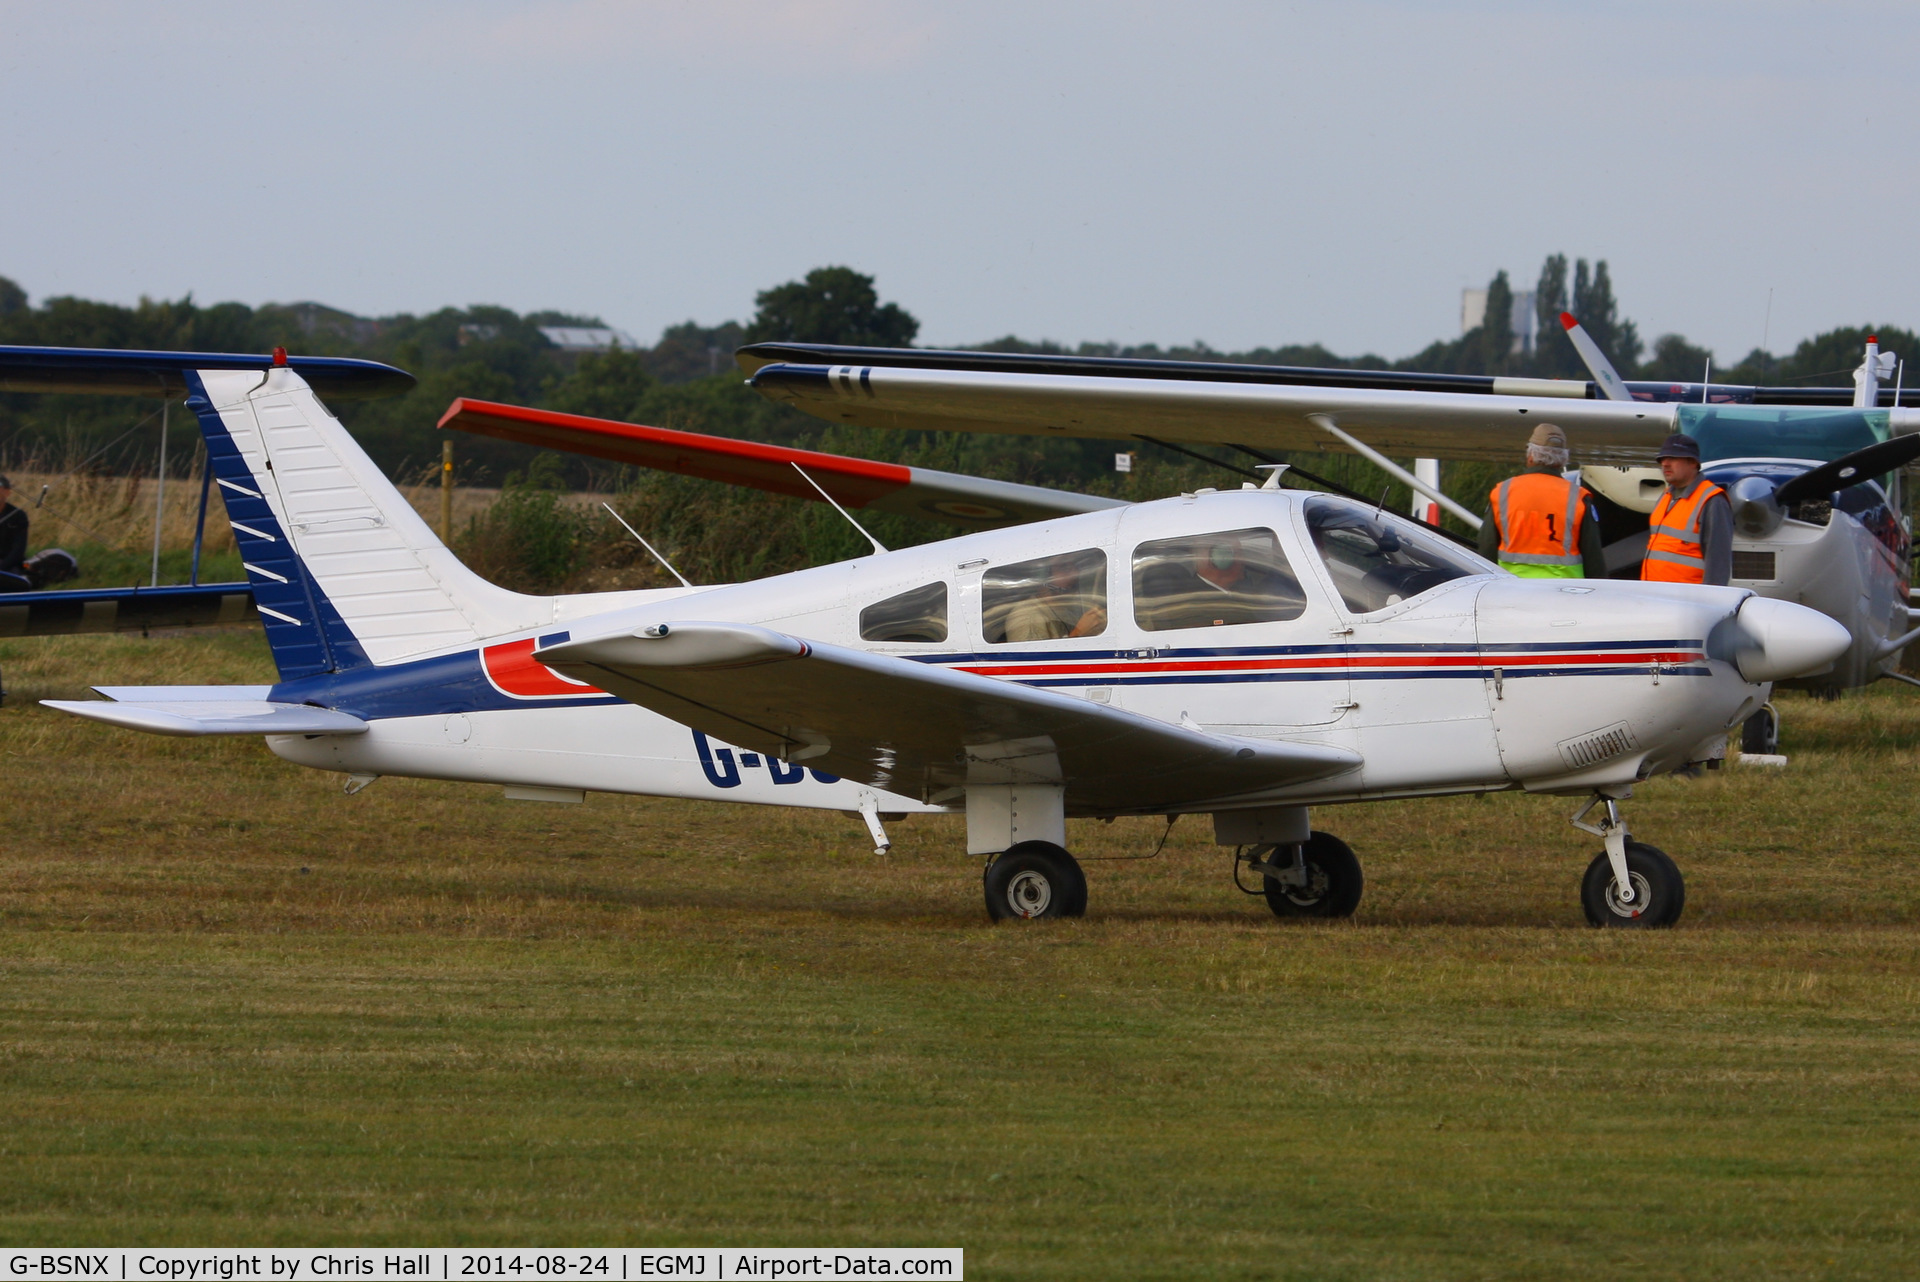 G-BSNX, 1979 Piper PA-28-181 Cherokee Archer II C/N 28-7990311, at the Little Gransden Airshow 2014